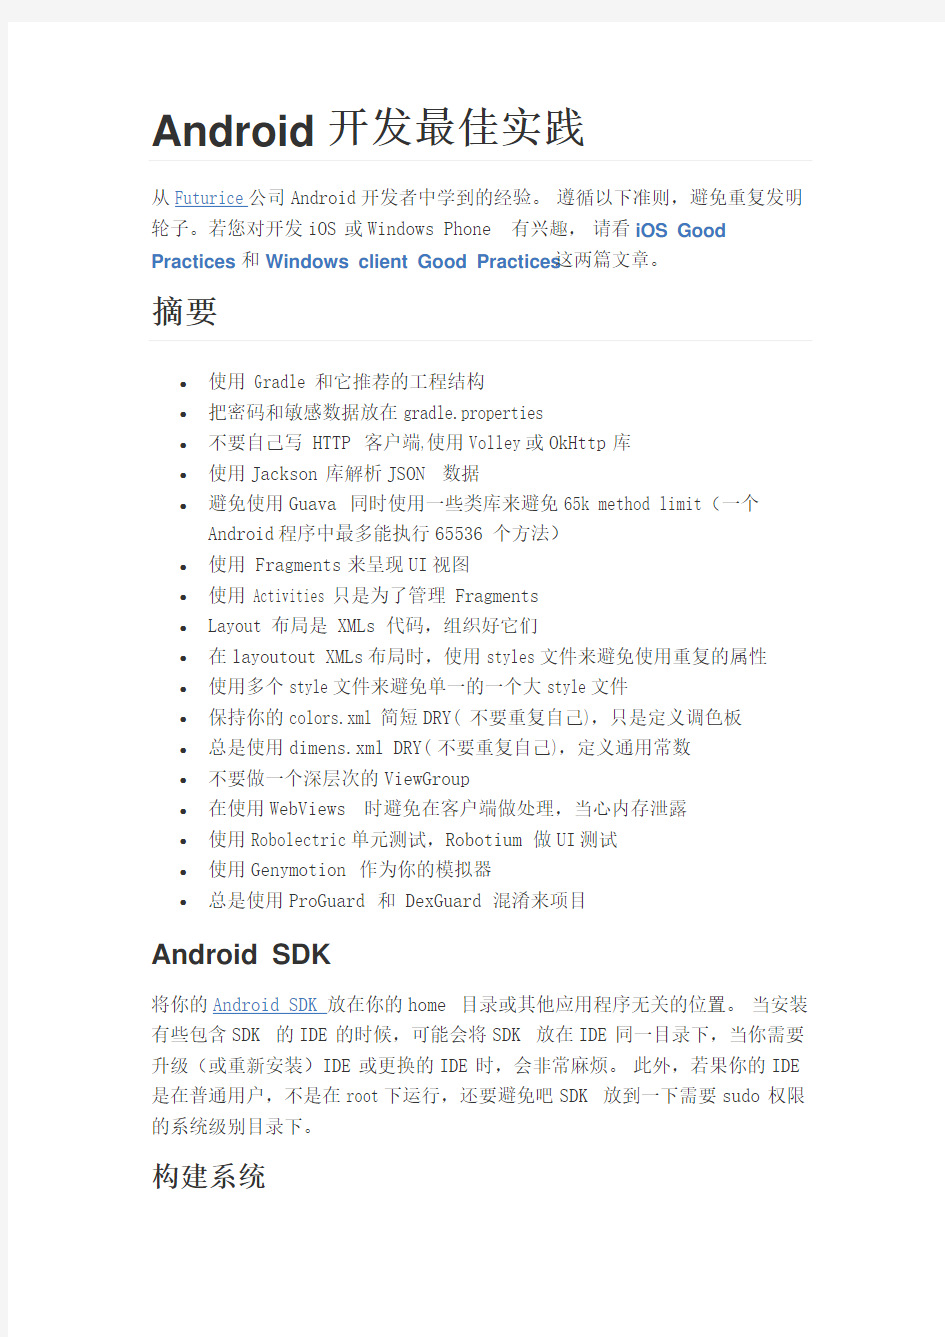 Android开发技术文档